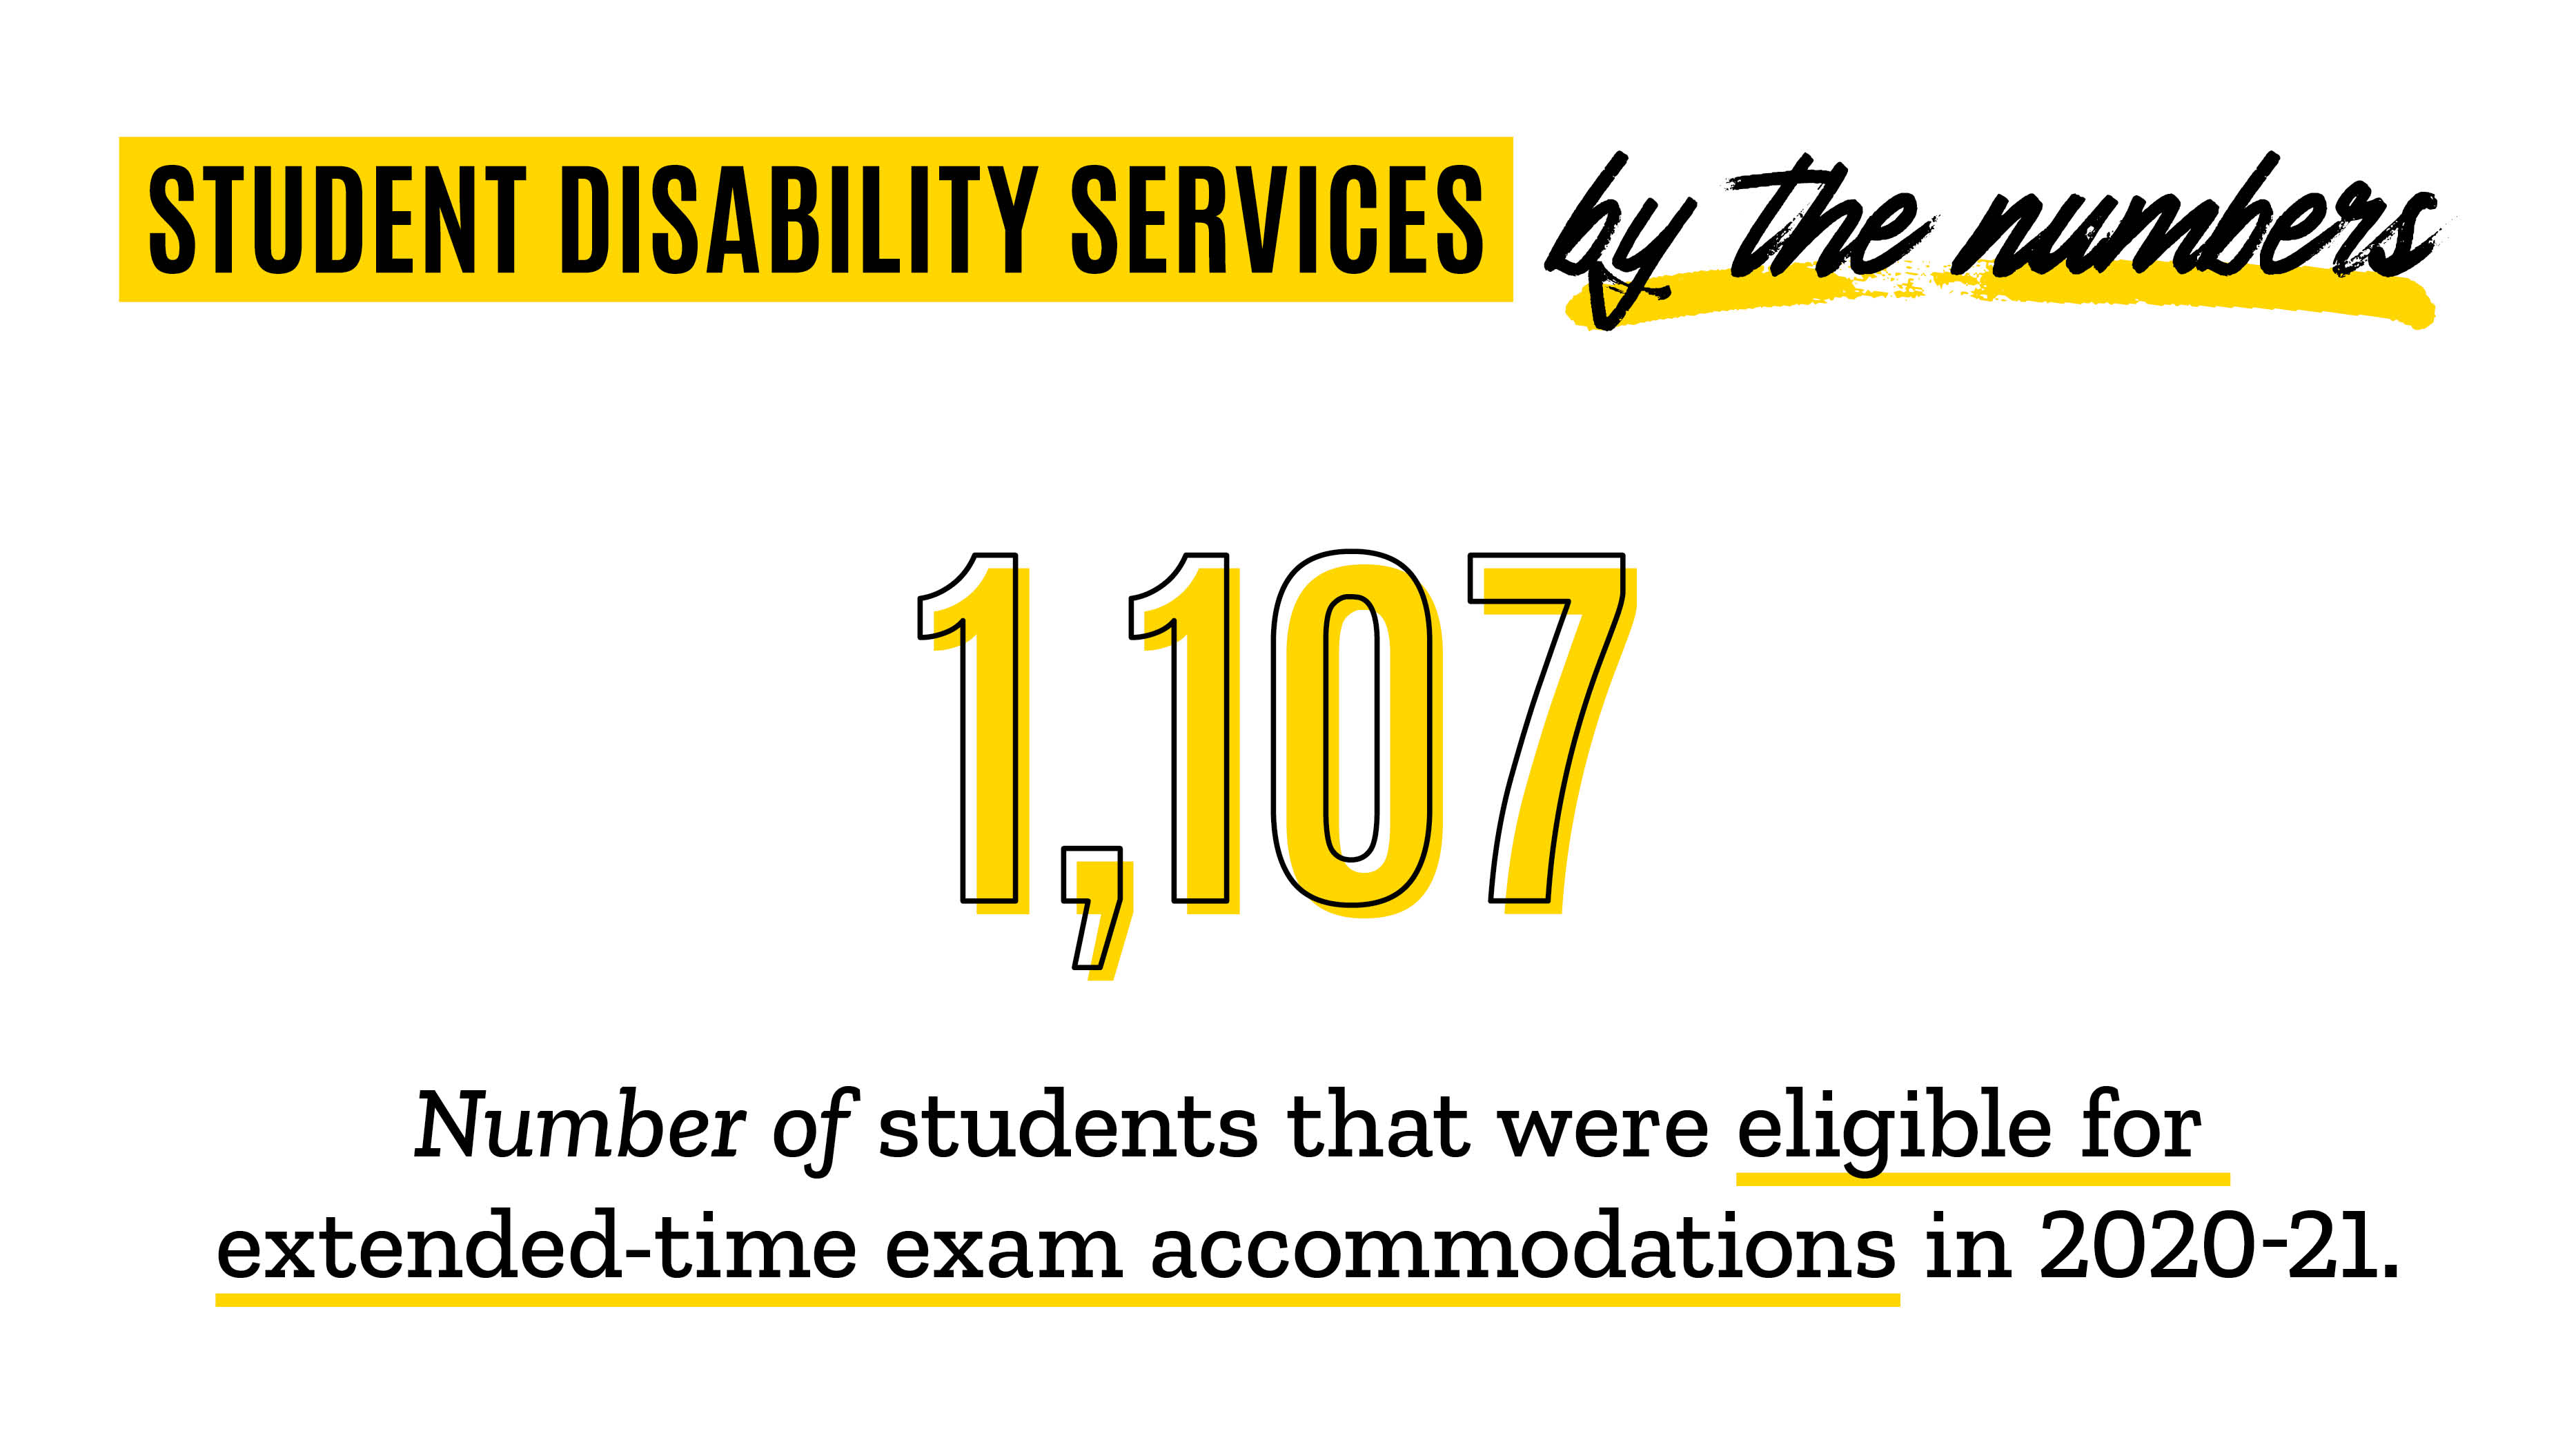 By the numbers 1,107 number of students that were eligible for extended-time exam accommodations in 2020-21